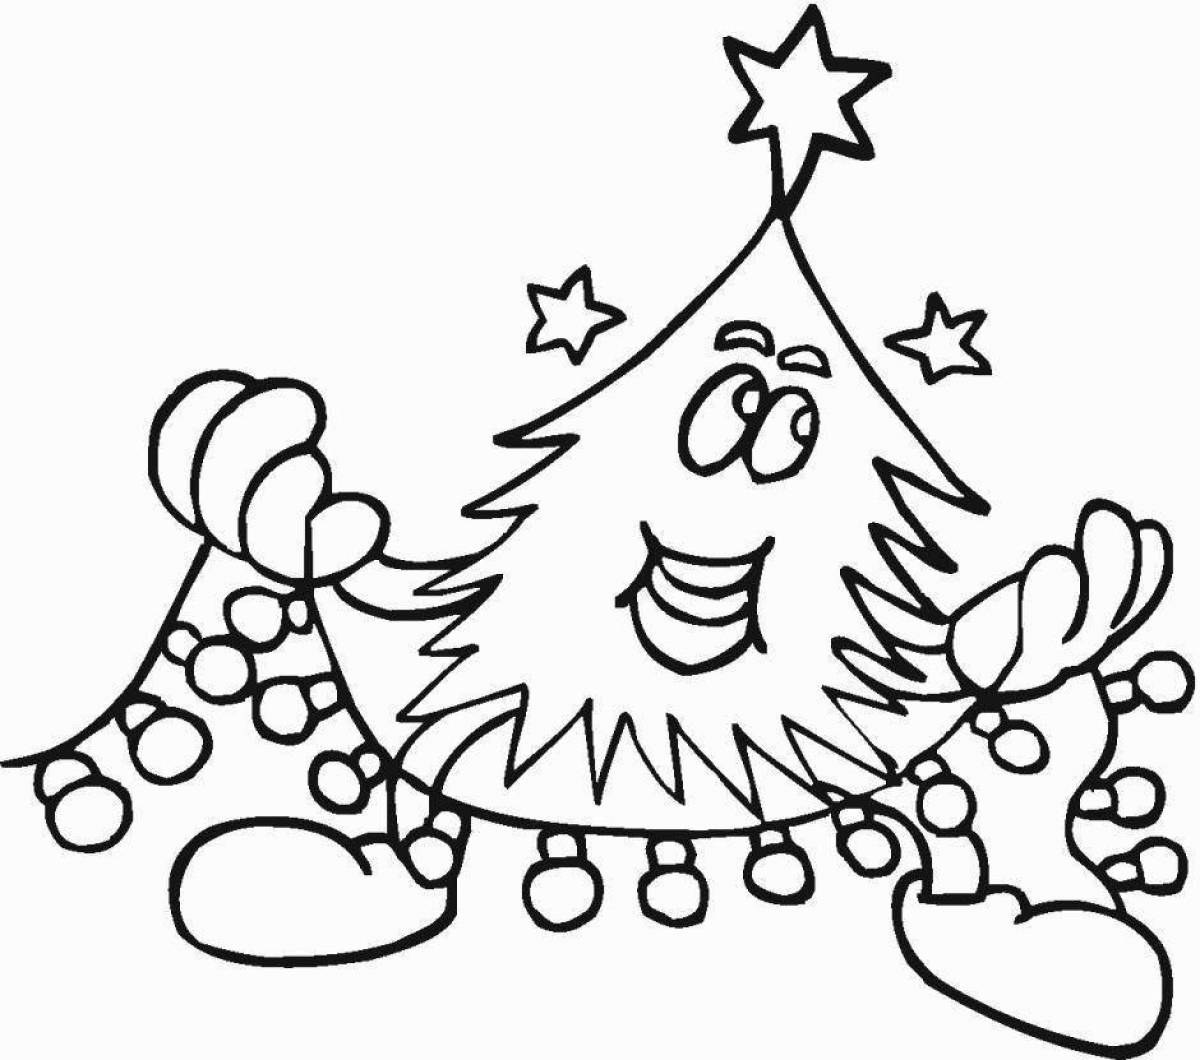 Intricate Christmas garland coloring book